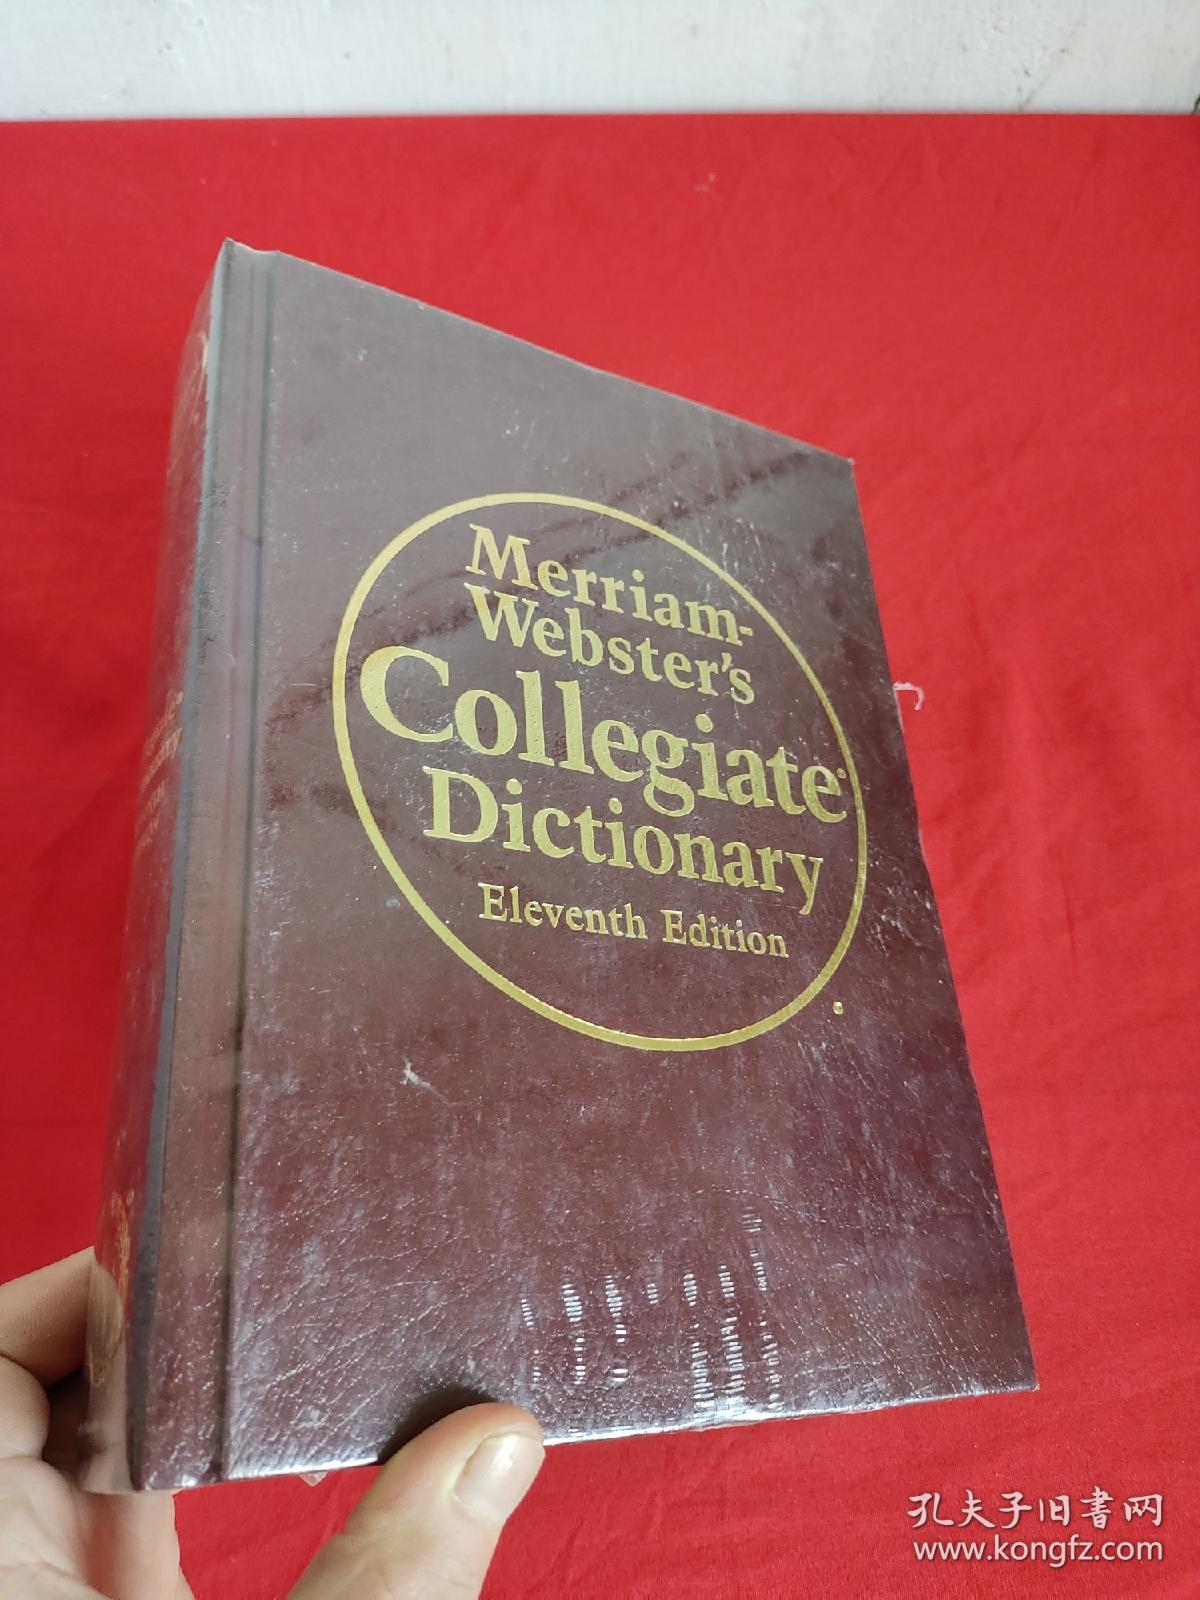 Merriam-Websters Collegiate Dictionary （Eleventh Edition）  （16开，硬精装）  【详见图】，全新未开封